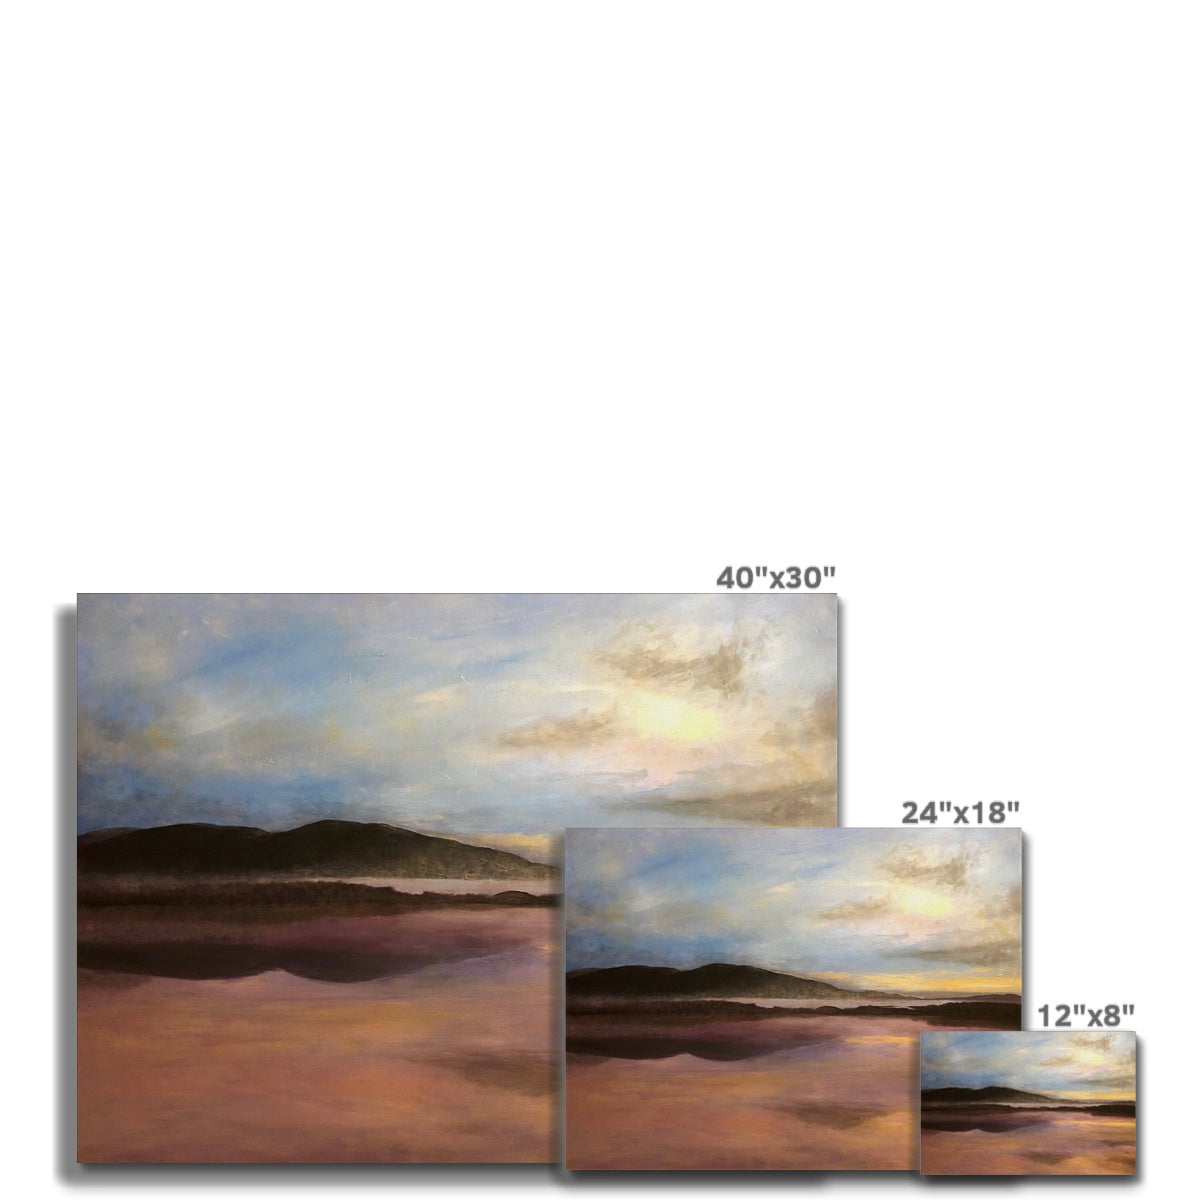 Loch Garten Painting | Canvas From Scotland-Contemporary Stretched Canvas Prints-Scottish Lochs & Mountains Art Gallery-Paintings, Prints, Homeware, Art Gifts From Scotland By Scottish Artist Kevin Hunter